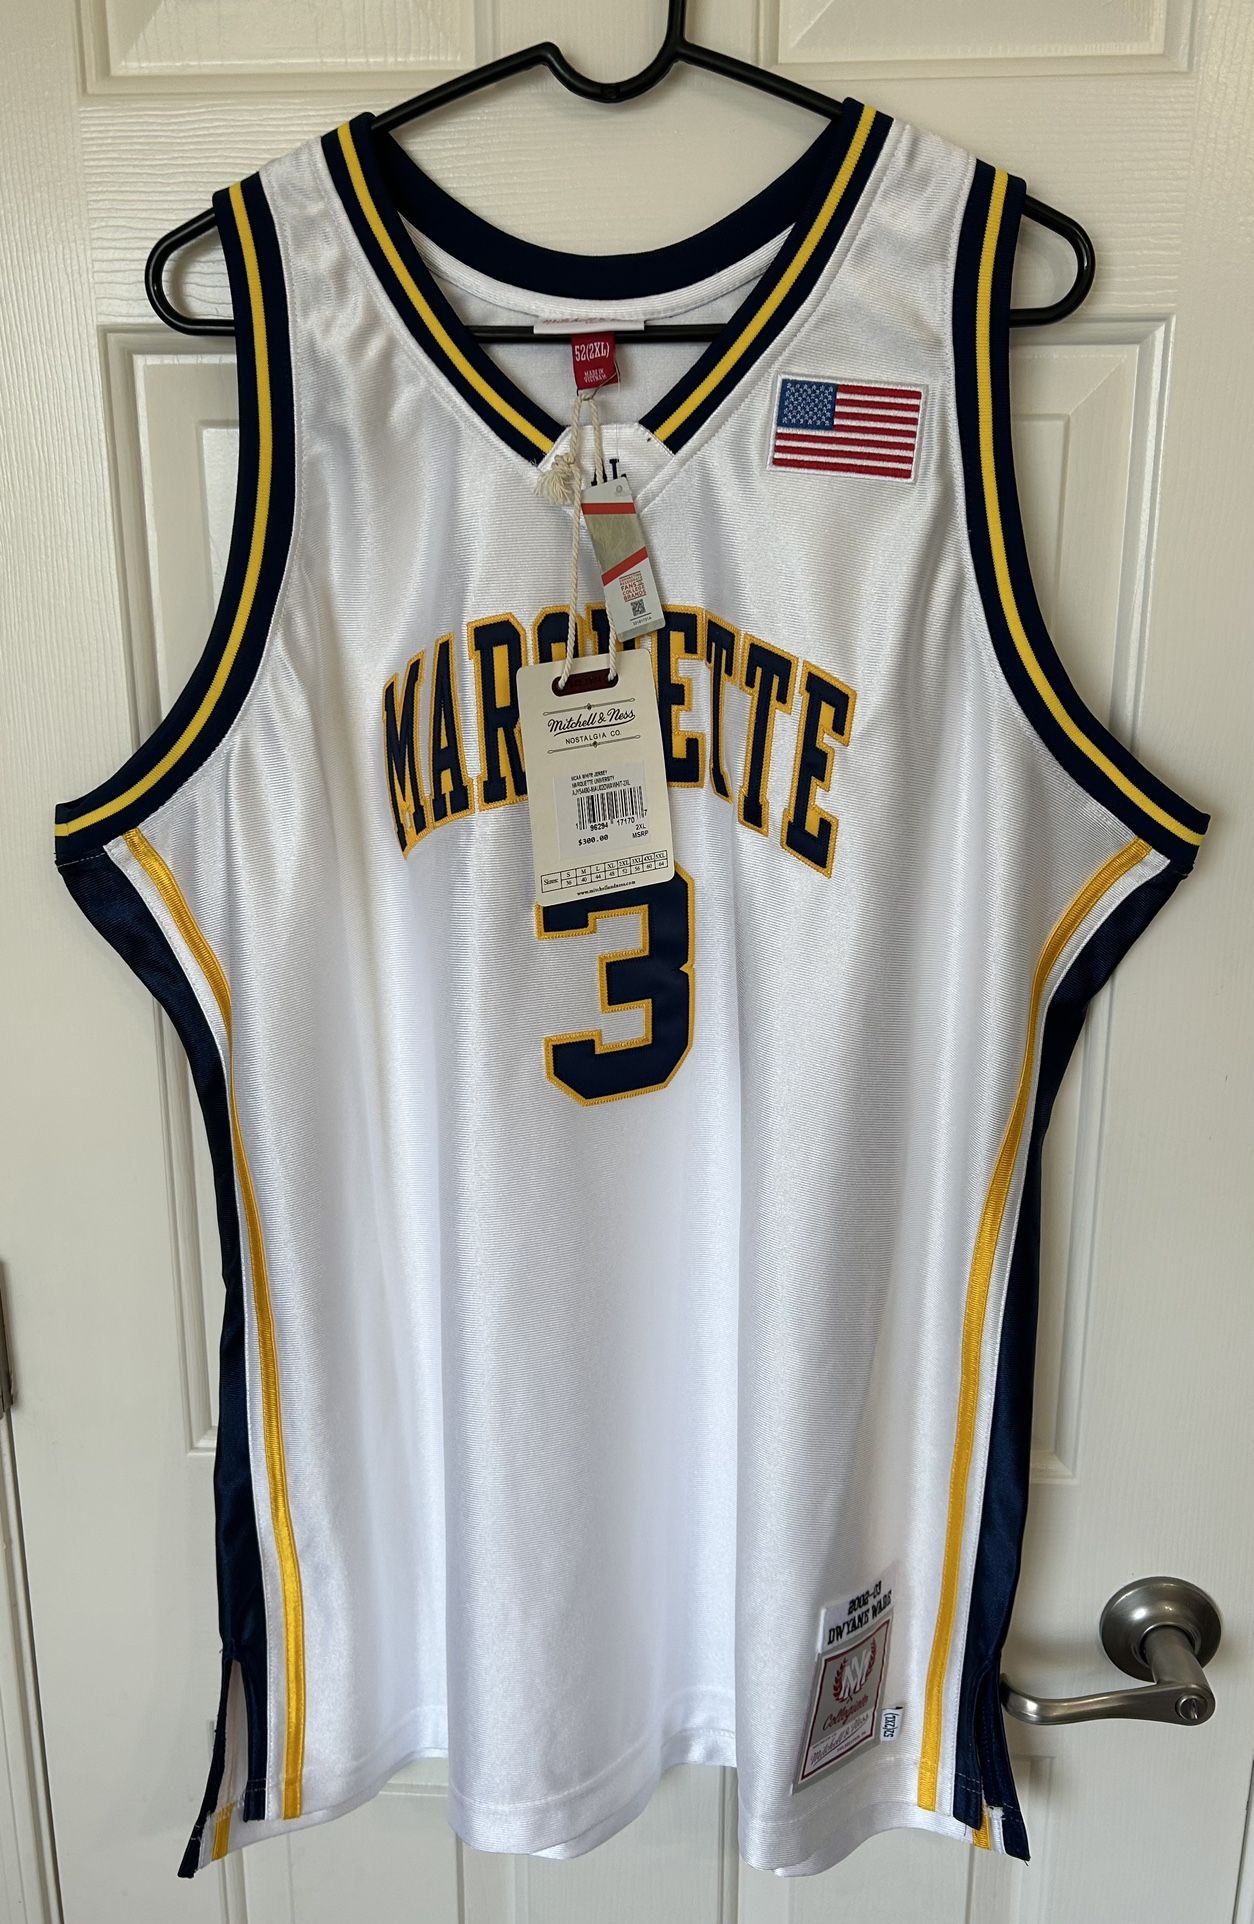  MITCHELL & NESS 100% AUTHENTIC 2003 MARQUETTE DWAYNE WADE JERSEY!